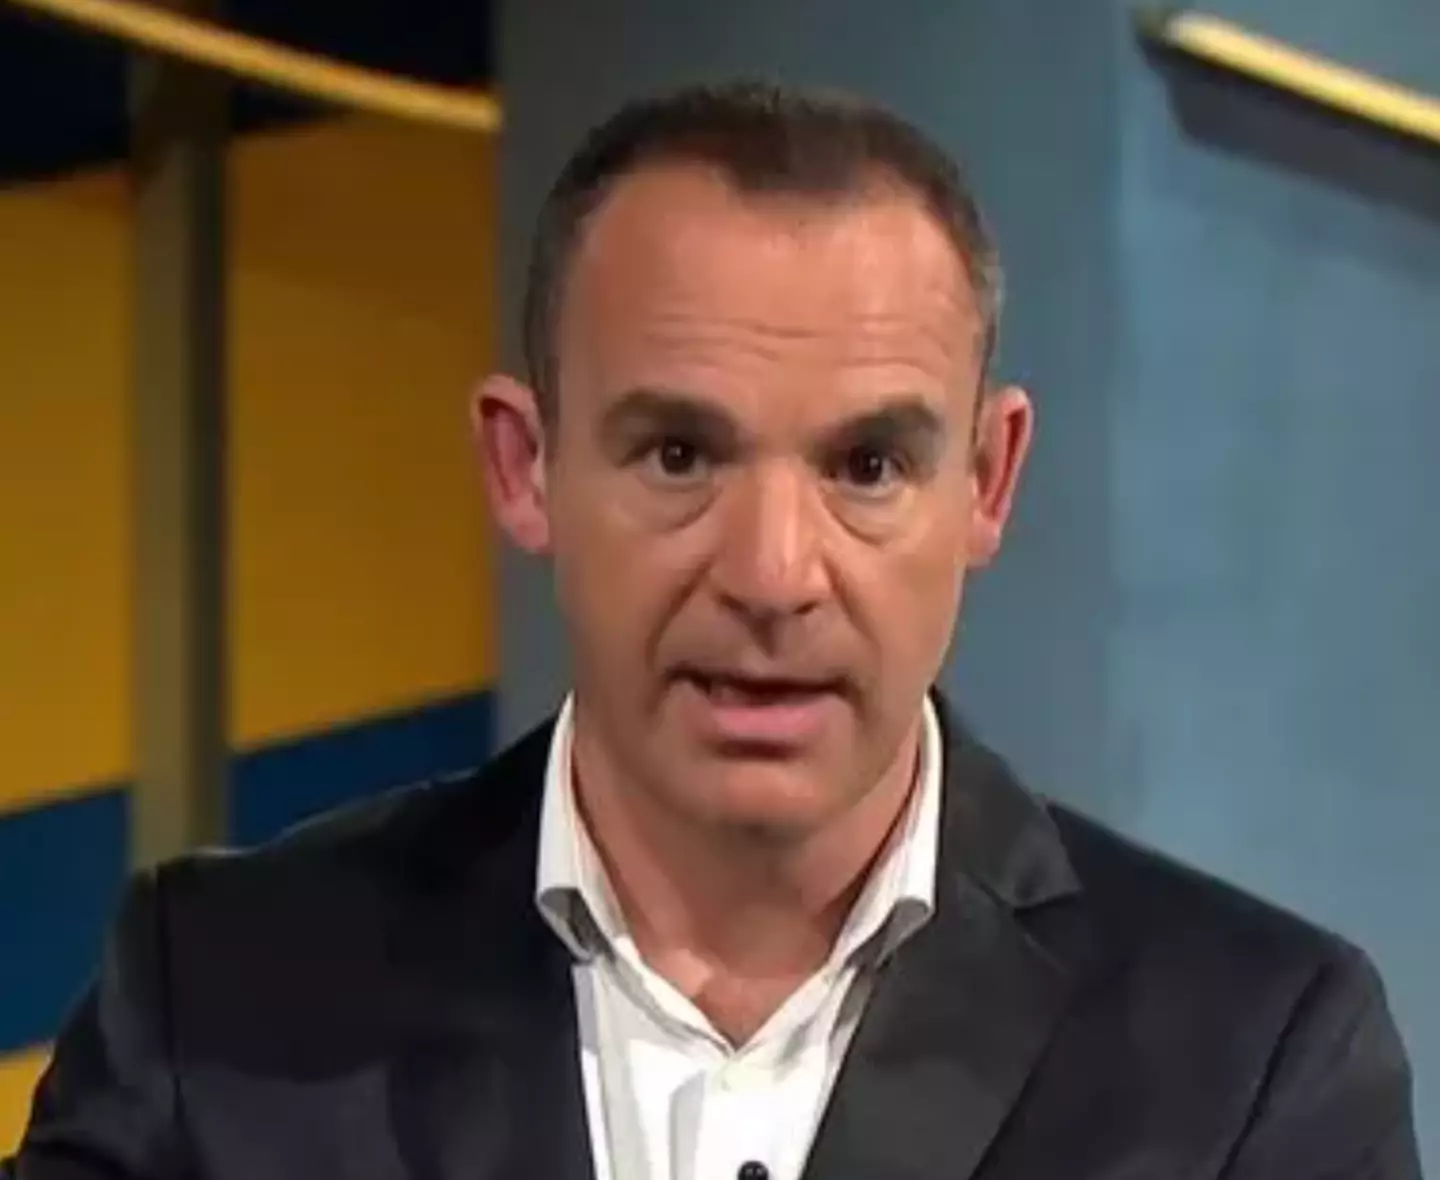 Martin Lewis has warned about the big problem with using air fryers instead of ovens.